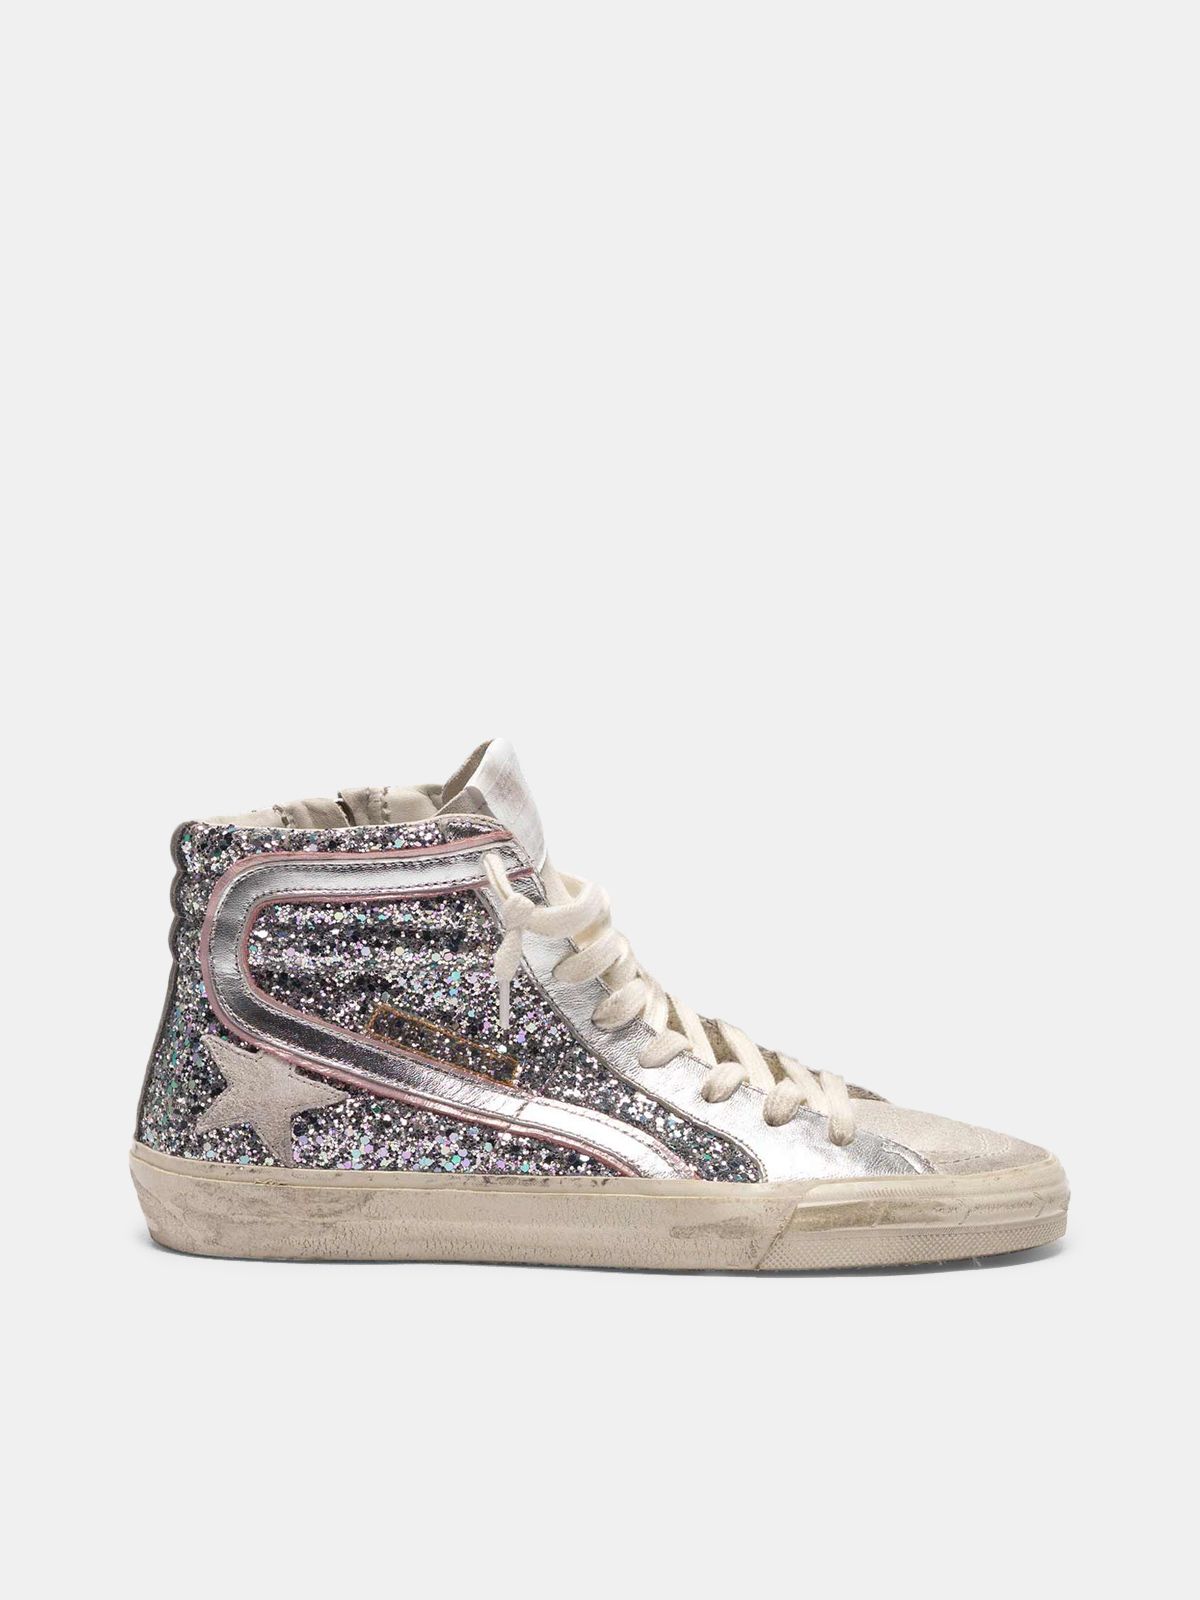 golden goose laminated glitter silver Slide in sneakers and leather